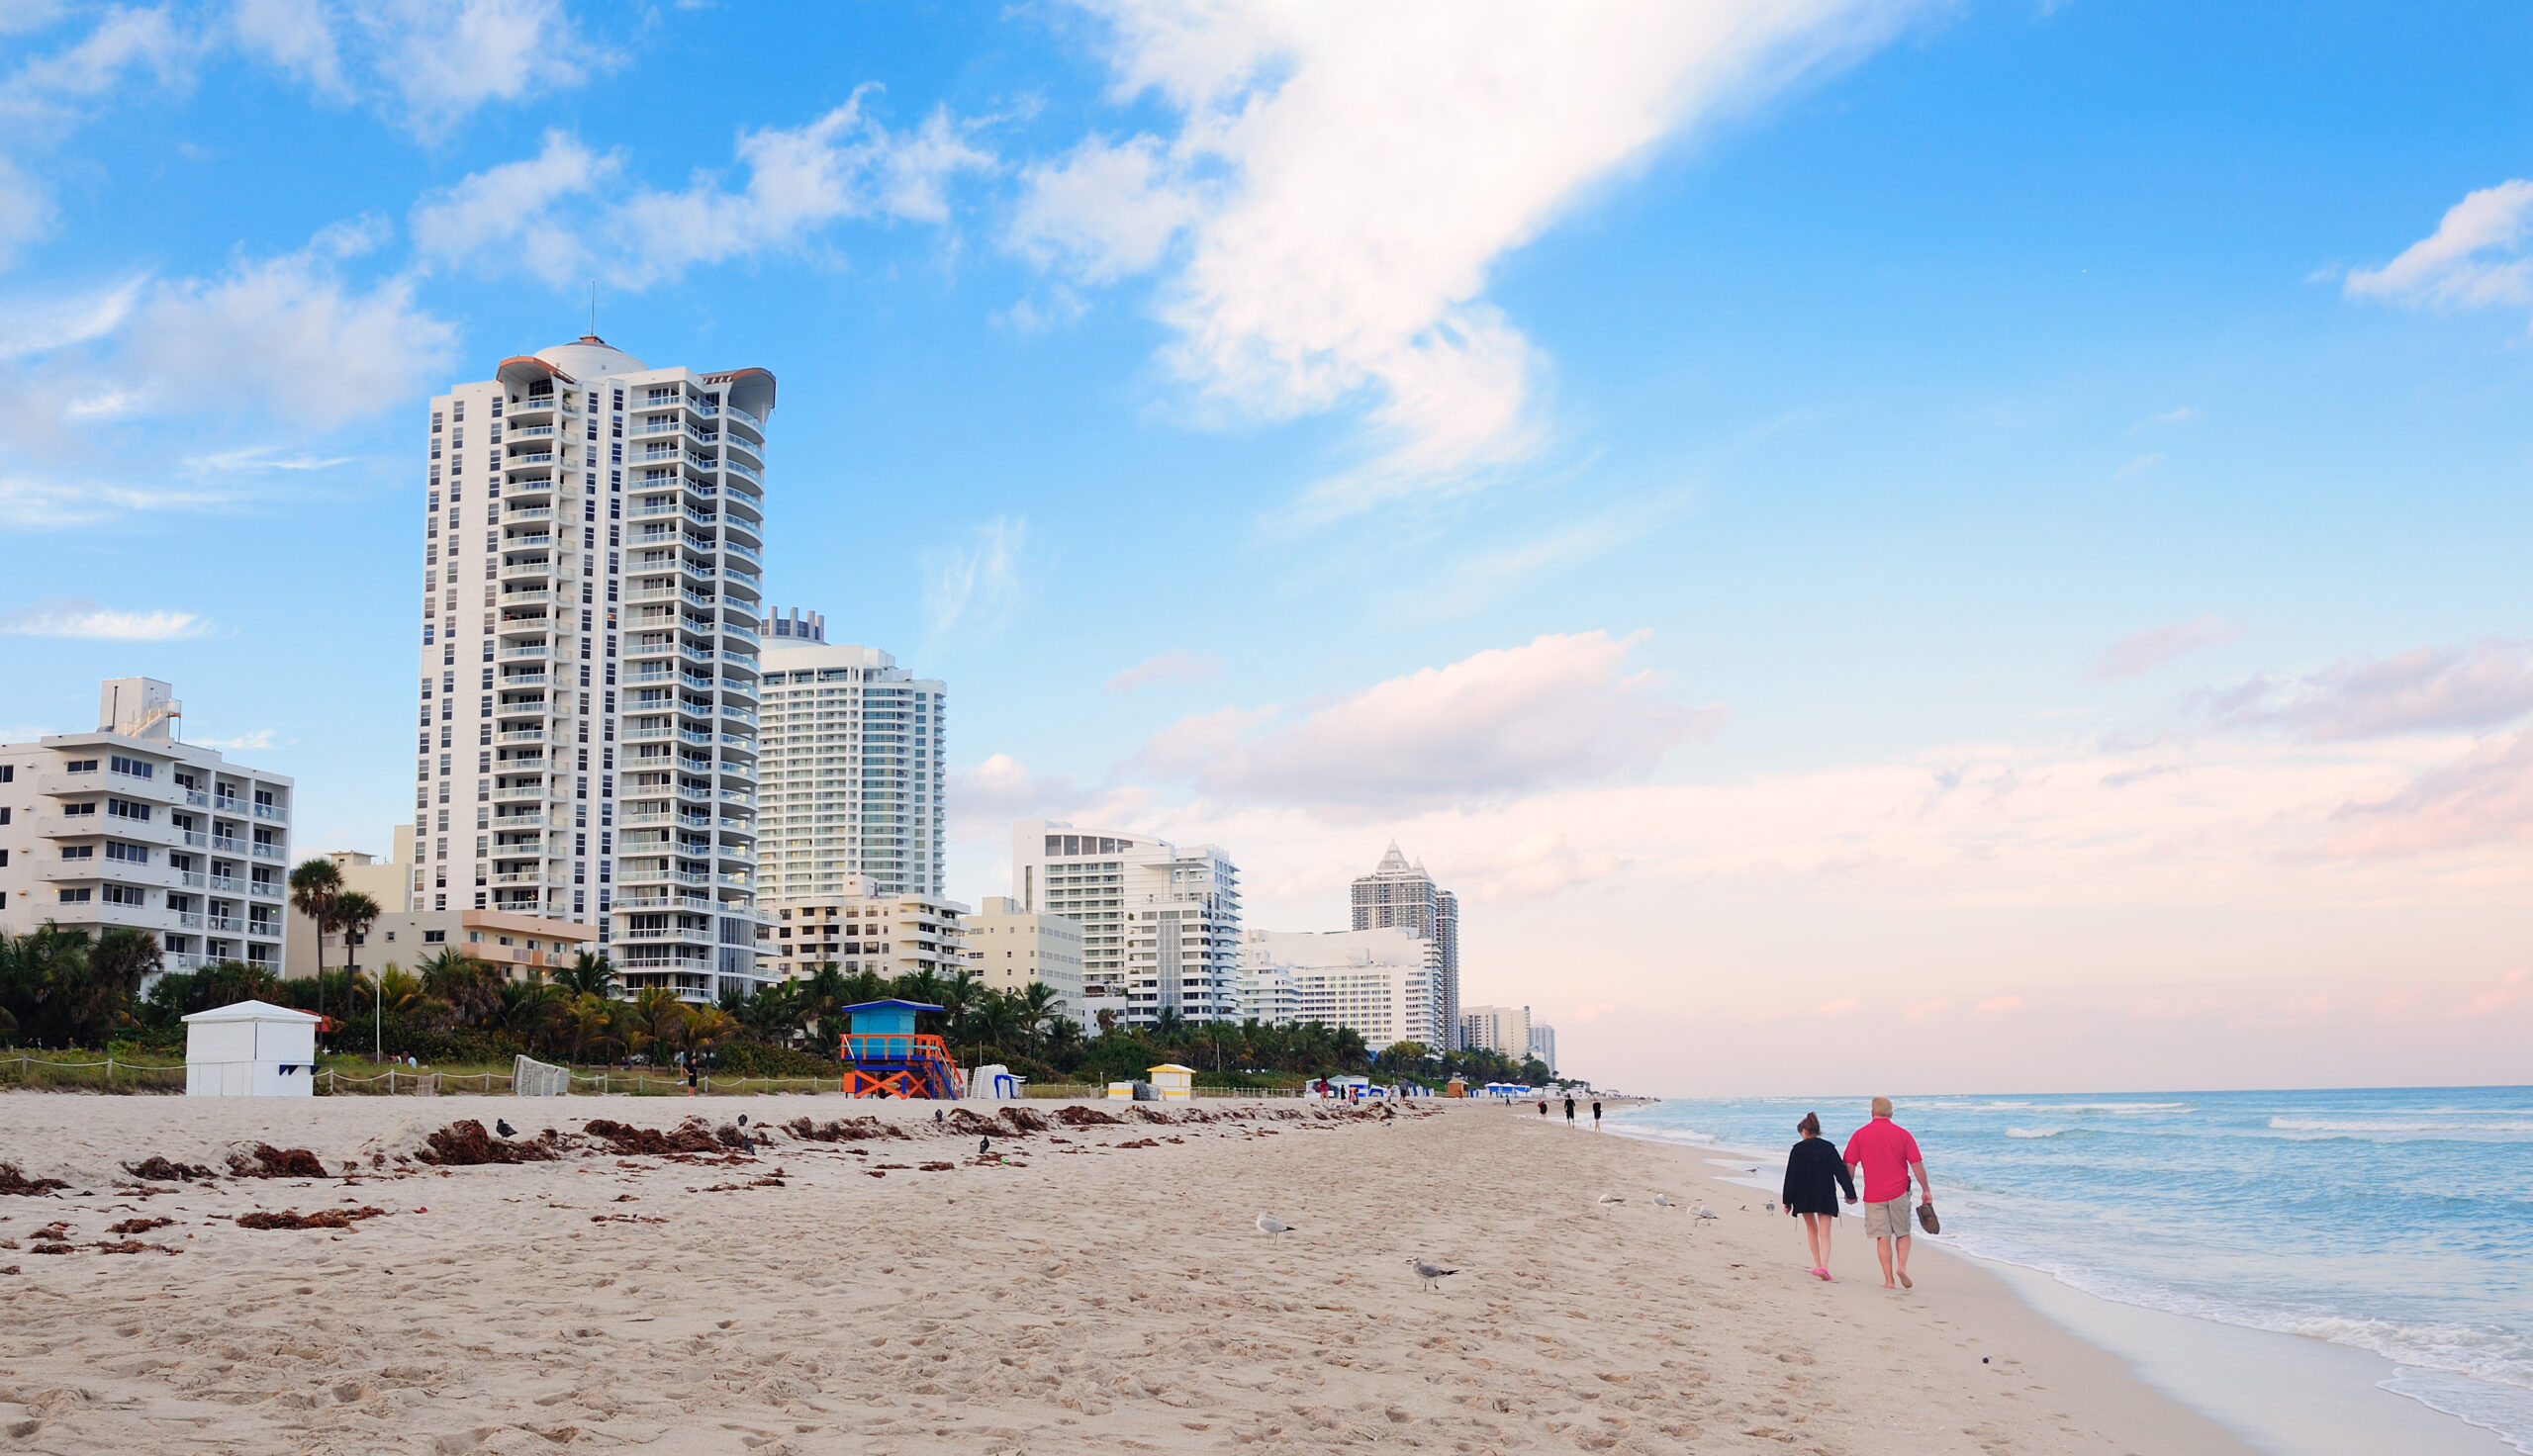 Miami South Beach with blue sky and hotels